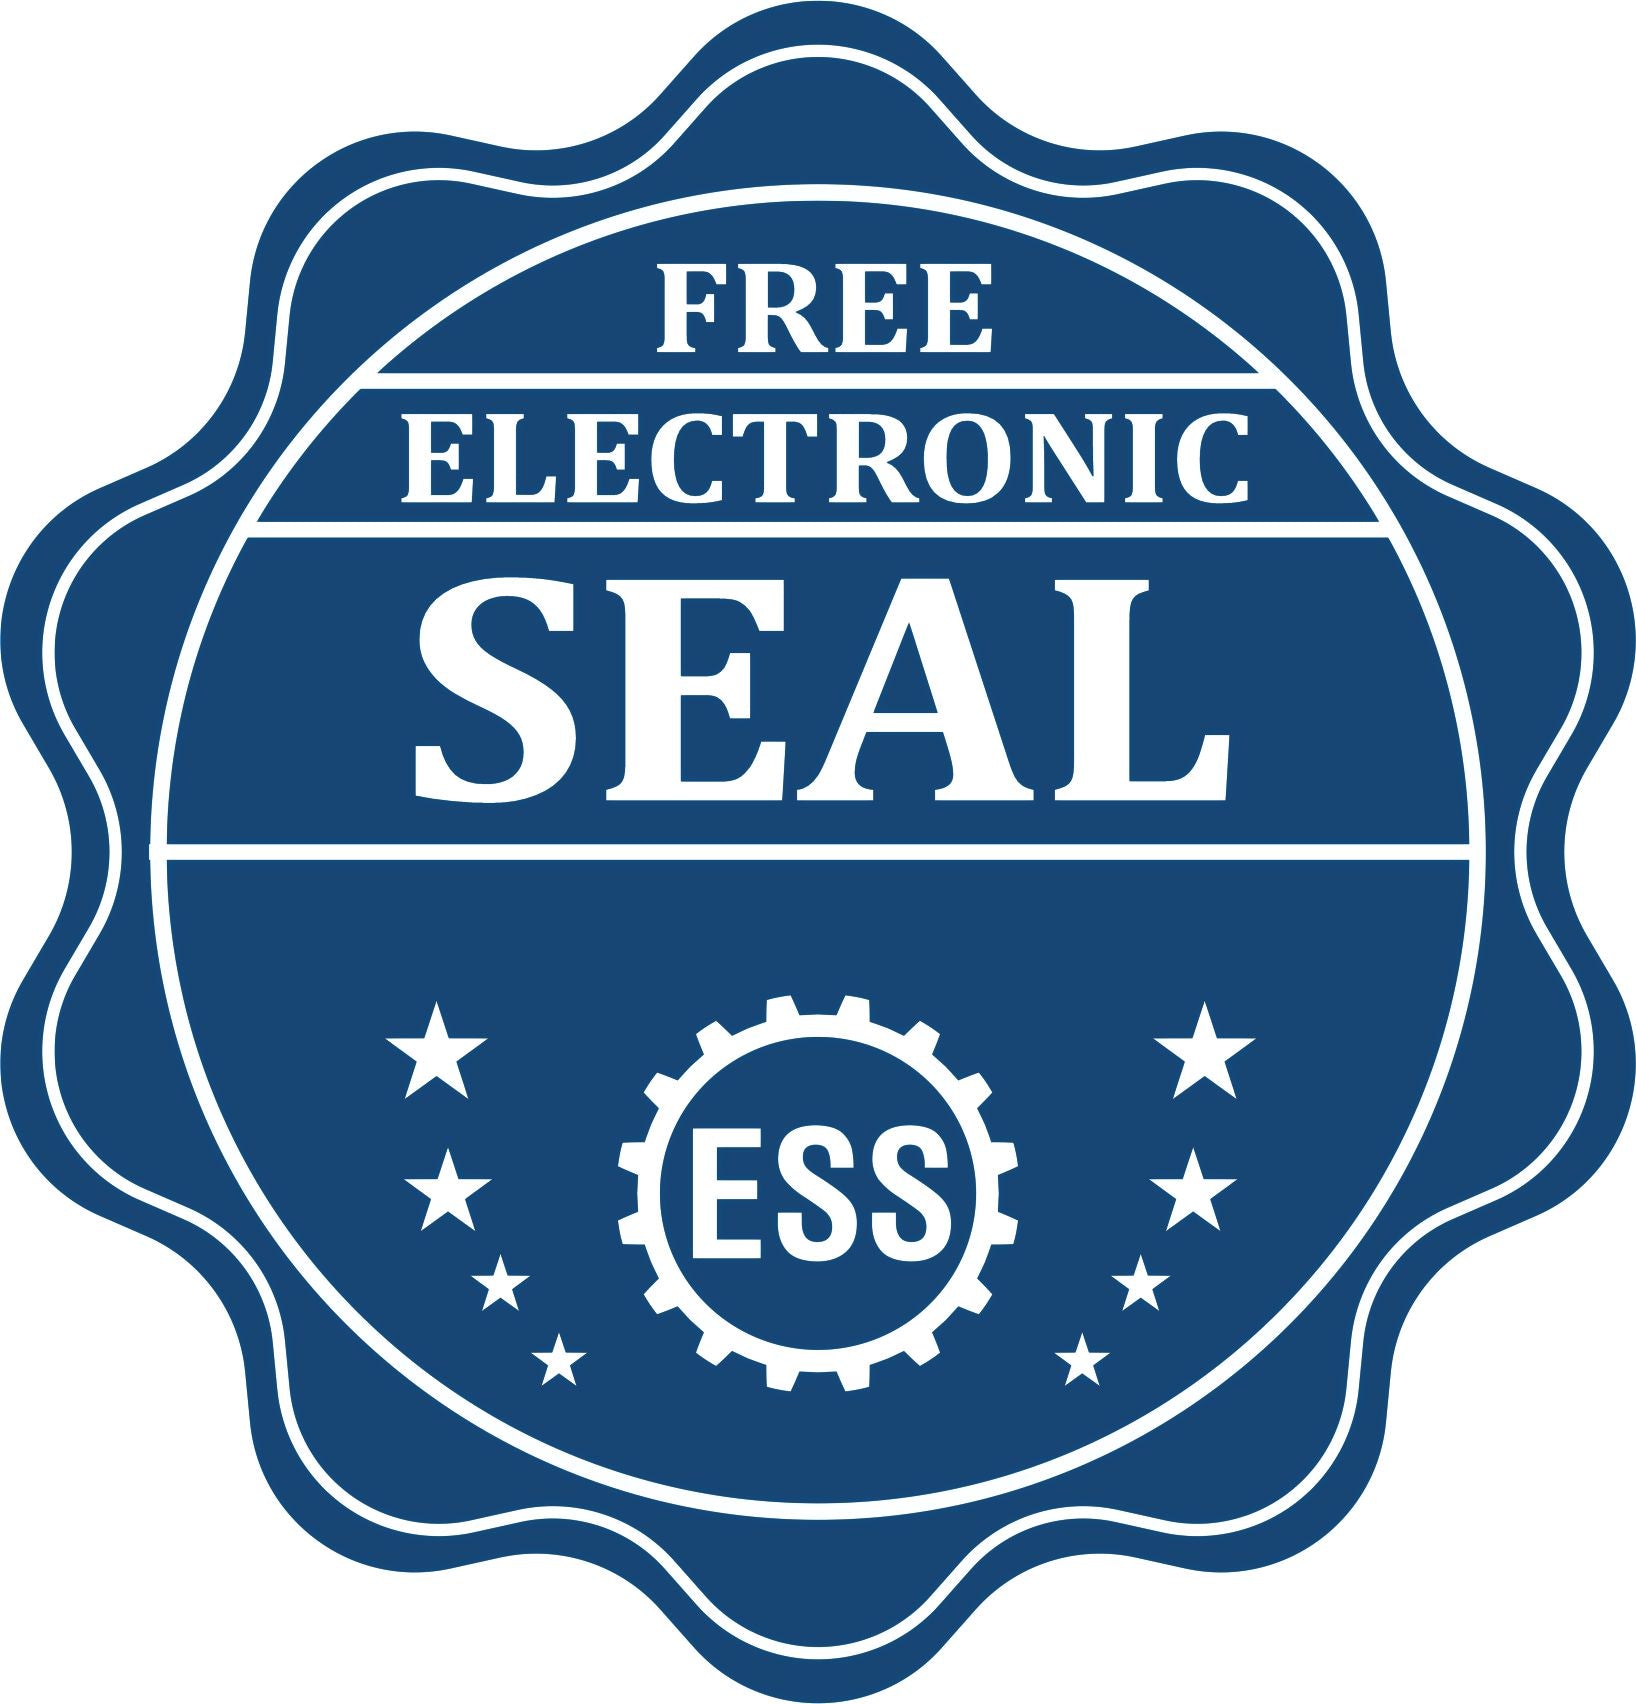 A badge showing a free electronic seal for the Hybrid Oregon Engineer Seal with stars and the ESS gear on the emblem.